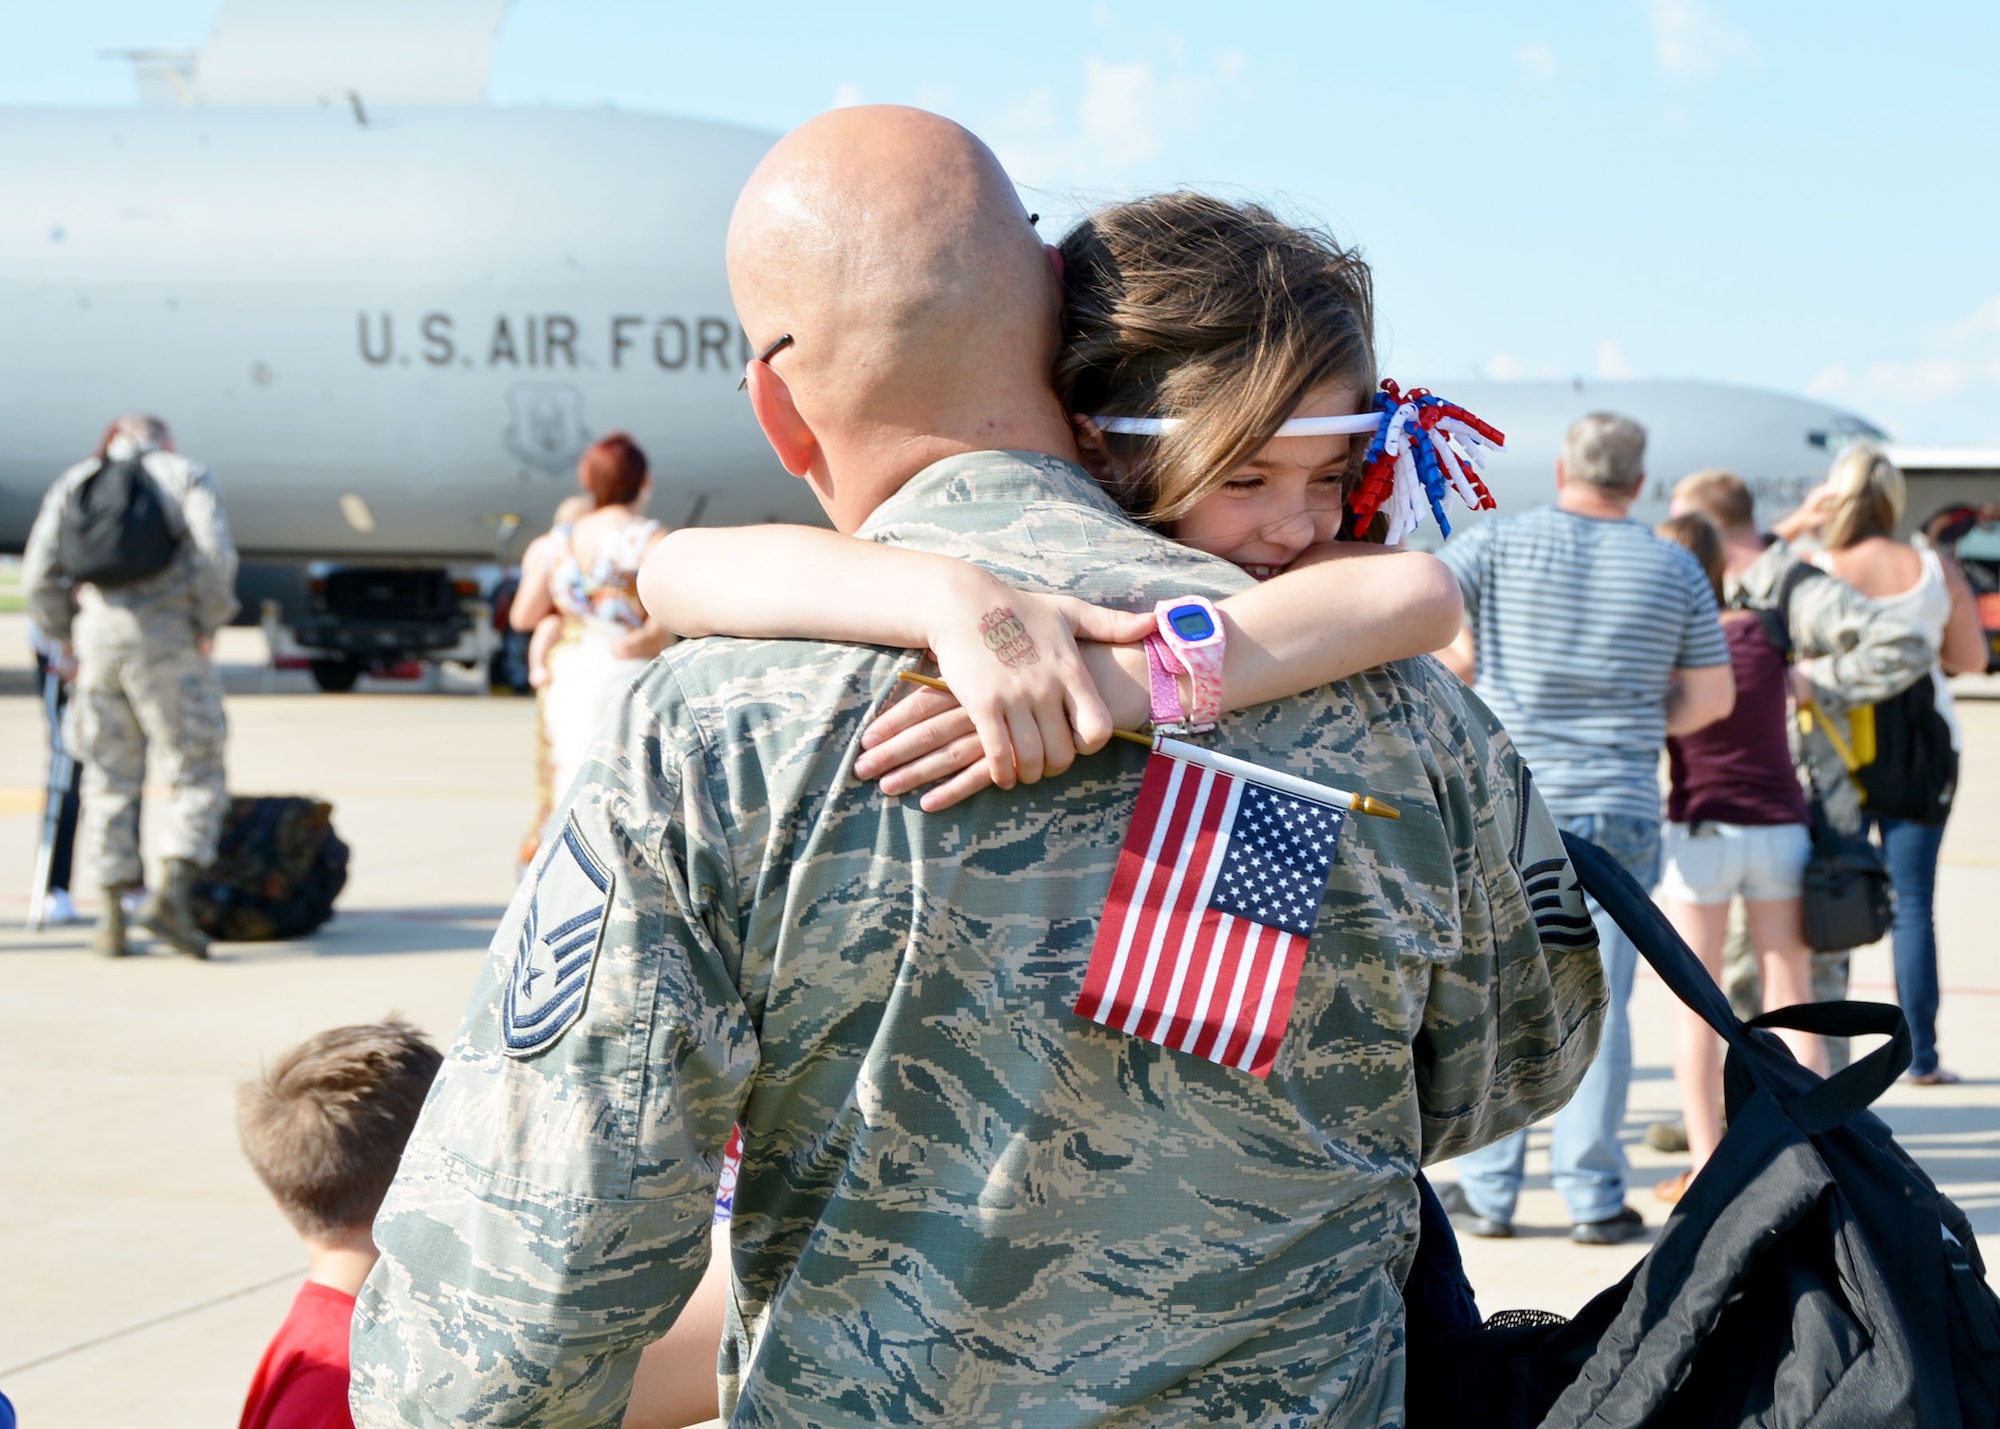 Master Sgt. Shaun Erickson of the 507th Aircraft Maintenance Squadron at Tinker Air Force Base, Okla., and his daughter share a hug June 11, 2016, following his return from a four-month deployment to Southwest Asia. Airmen returning from deployment are encouraged to use the Yellow Ribbon Program, which is a series of events designed to provide members and families with essential resources prior to departure, a level of stability and support during deployment, and successful re-integration techniques after the deployment cycle ends. (U.S. Air Force photo/Tech. Sgt. Lauren Gleason)